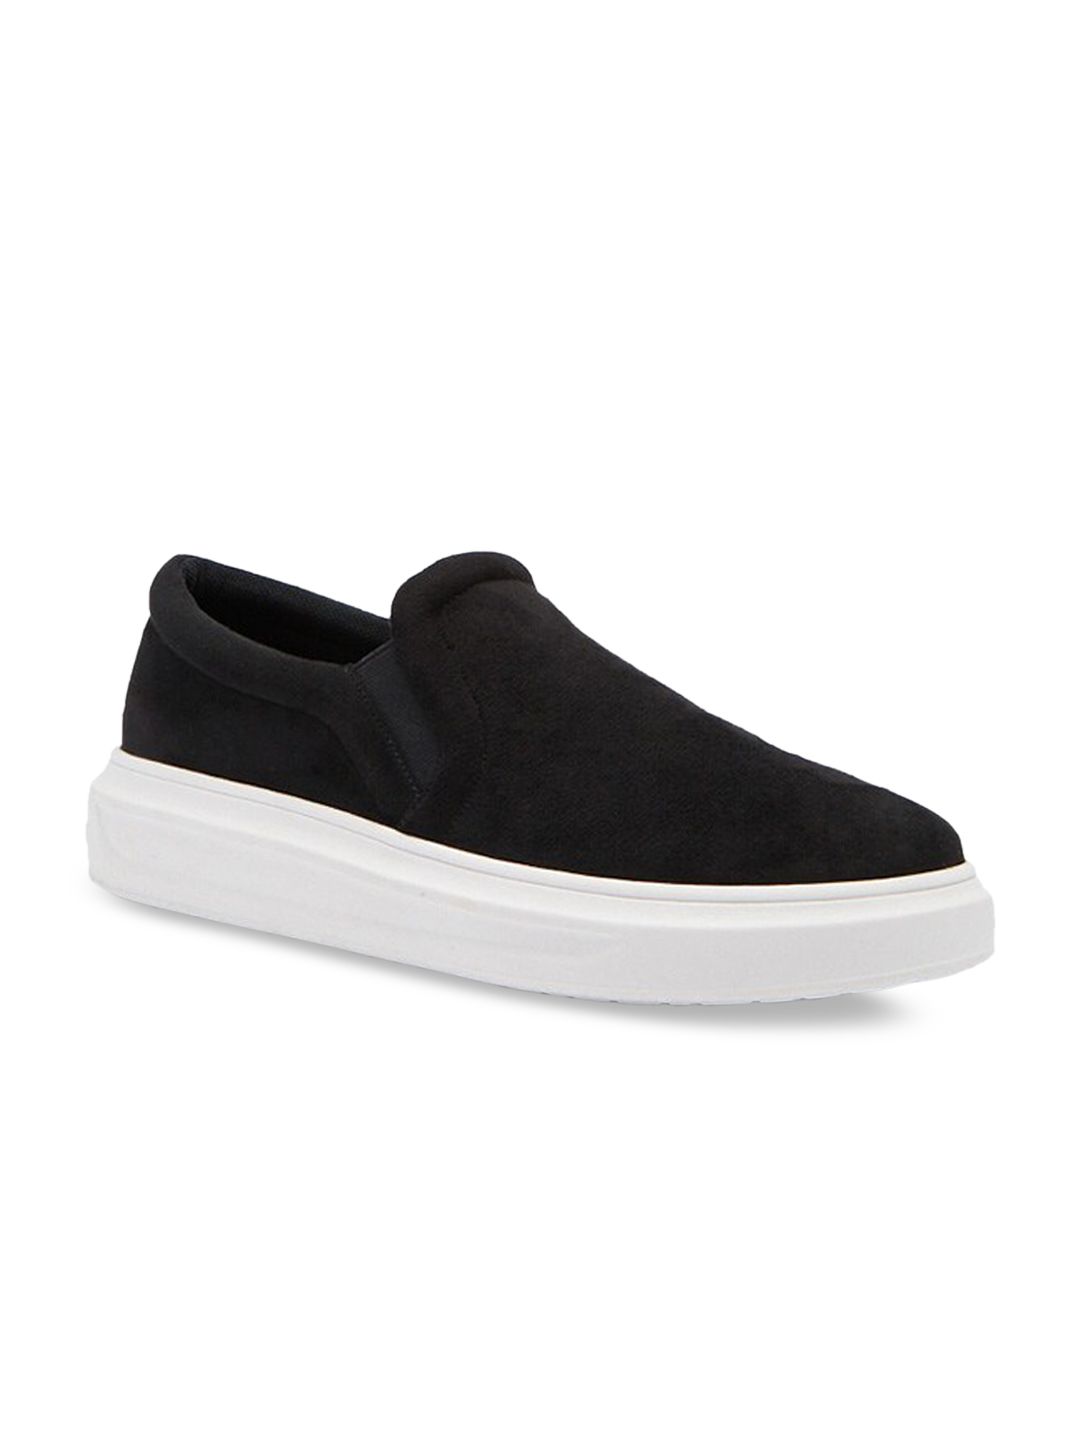 FOREVER 21 Women Black Colourblocked Suede Slip-On Sneakers Price in India